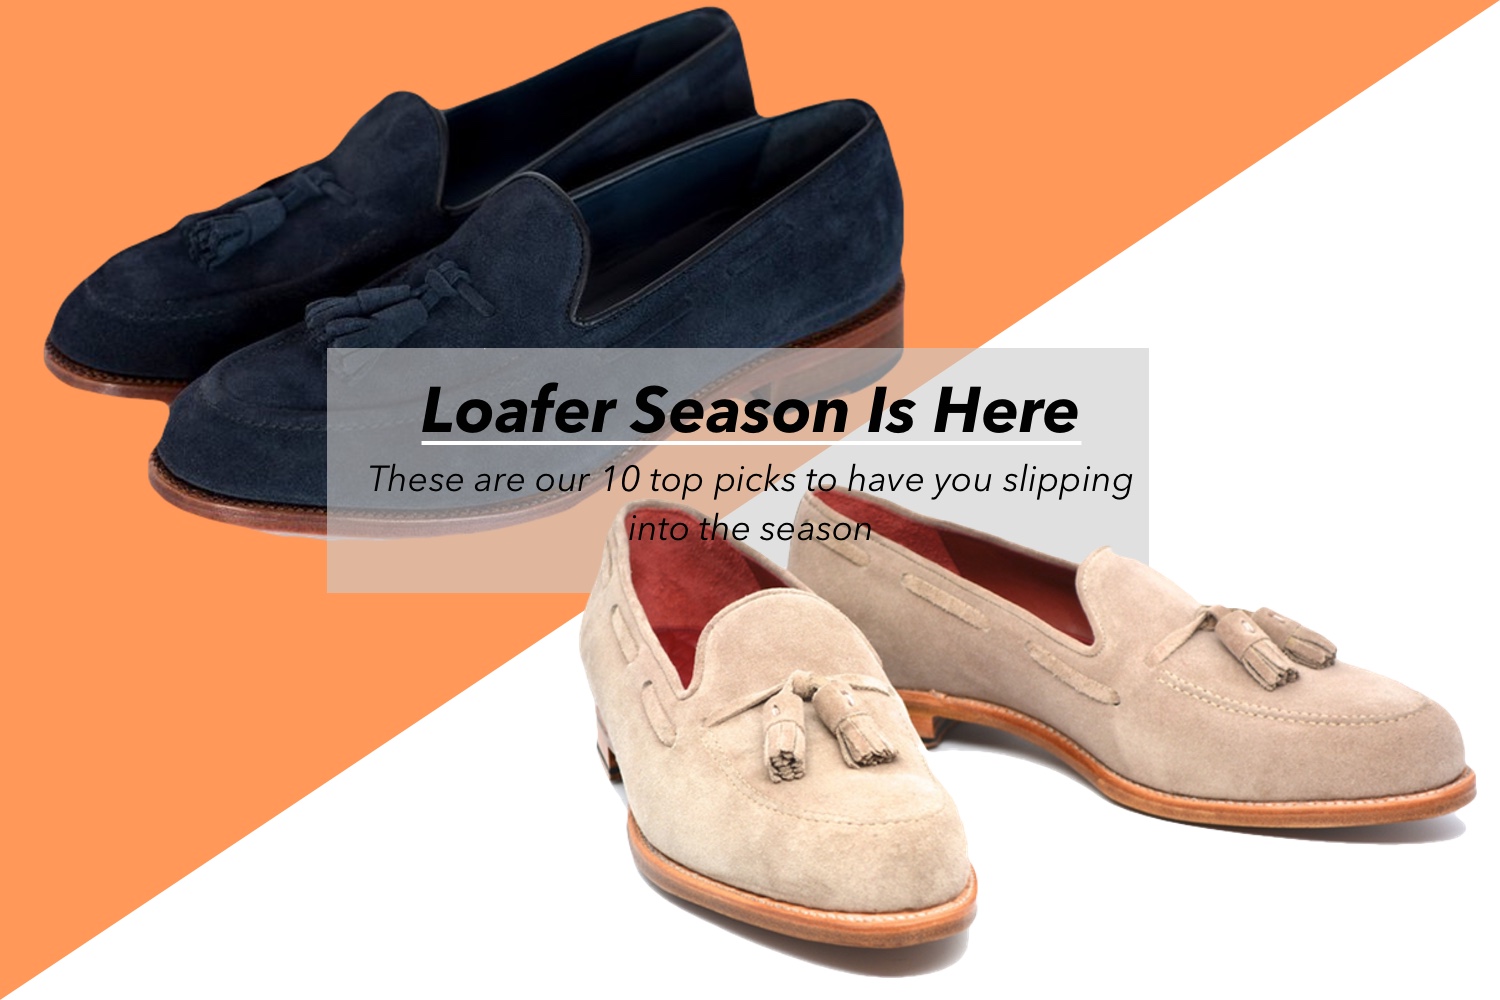 Men's Loafers for Fall 2016